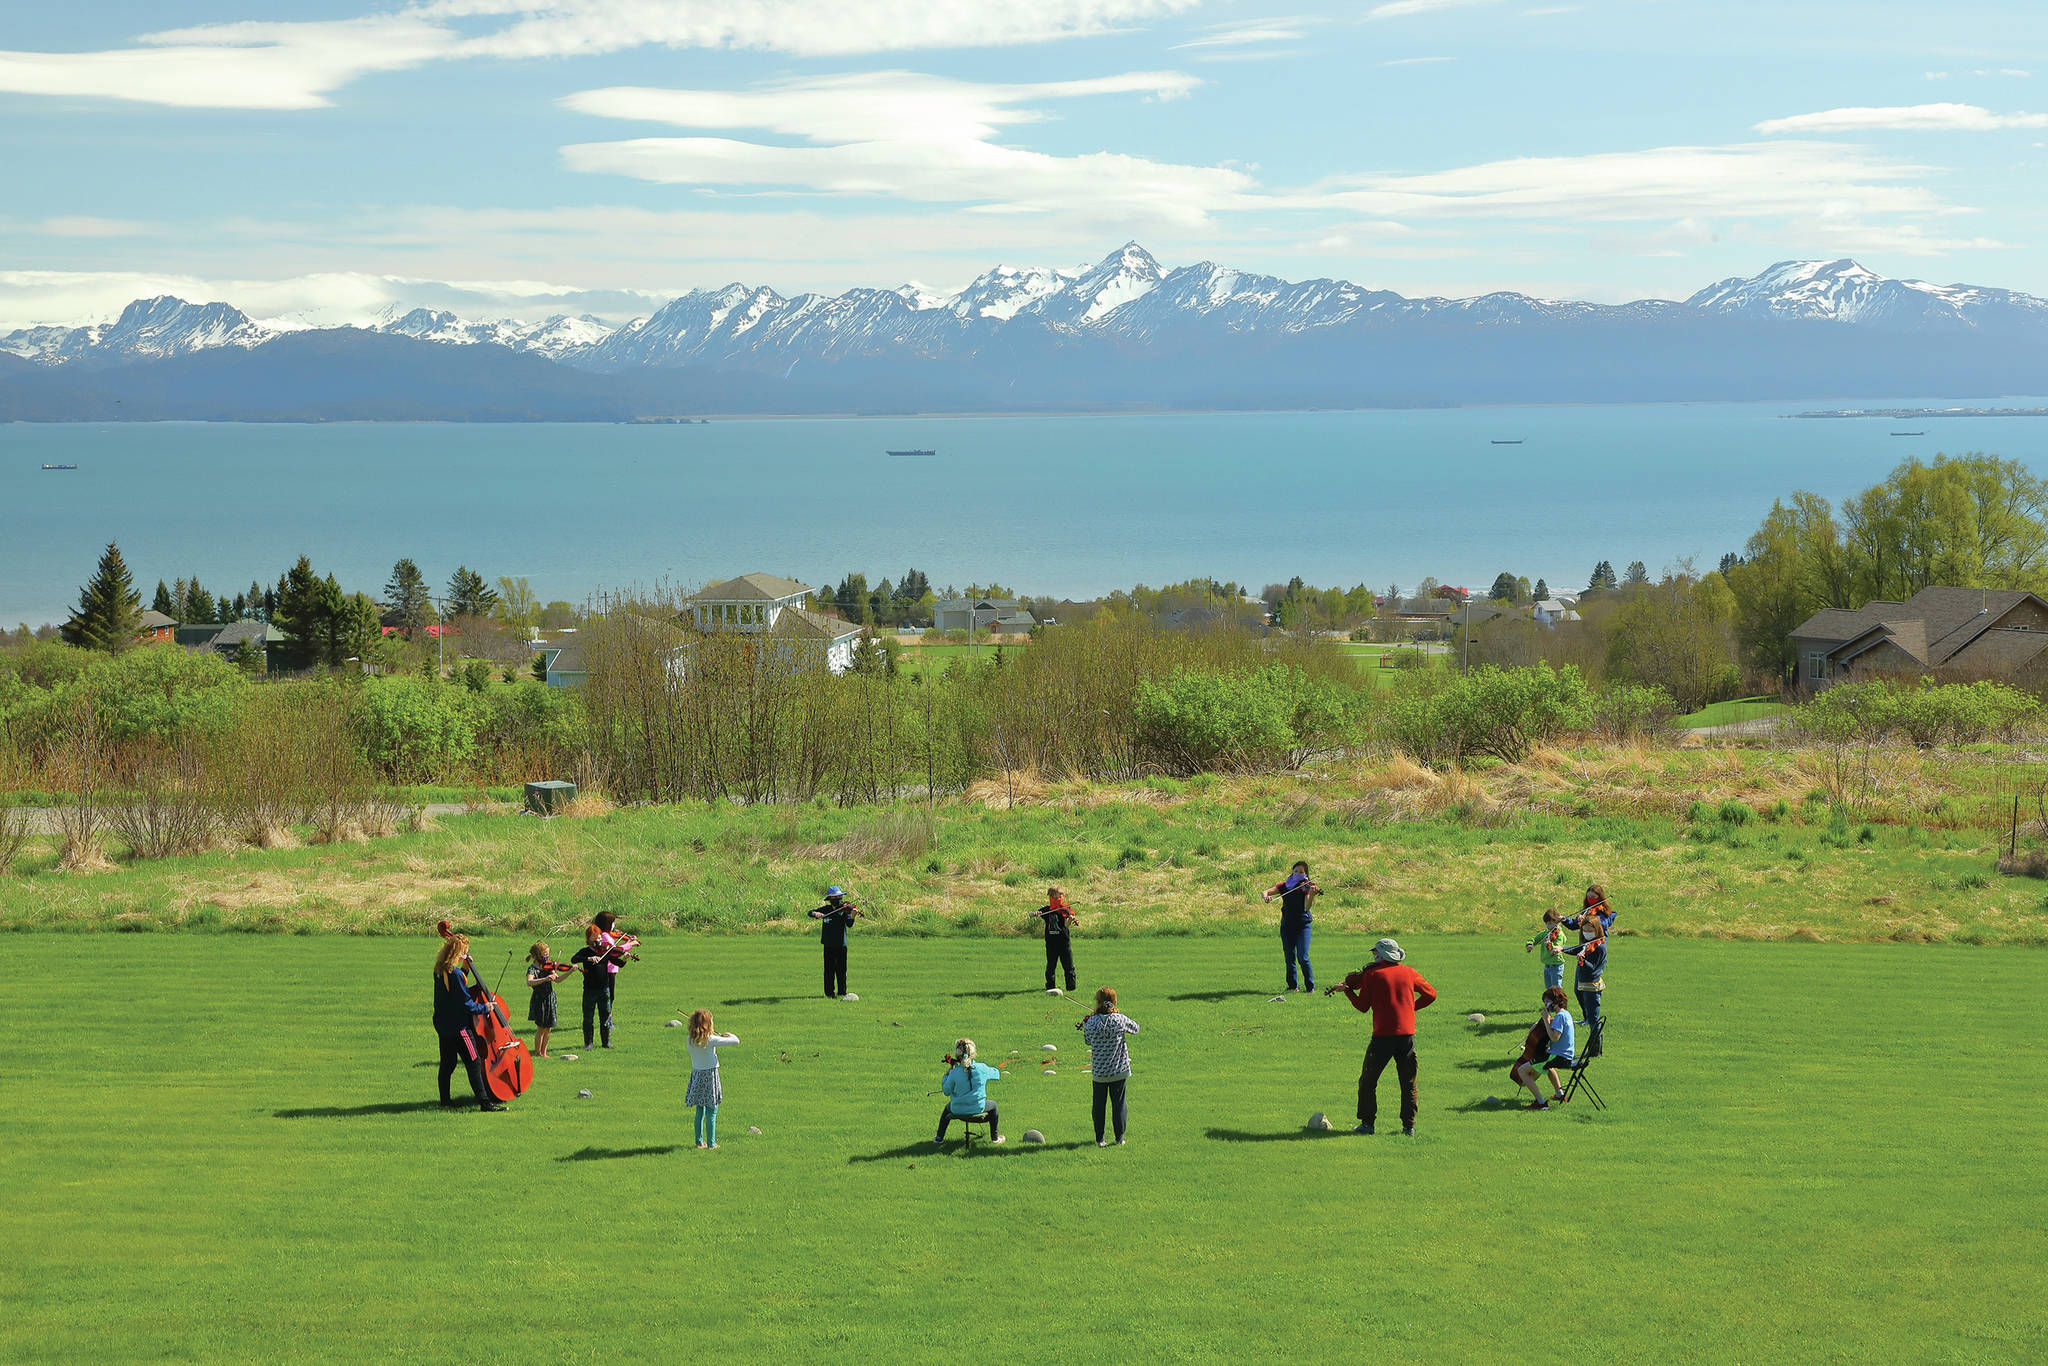 Members of the Homer Youth String Orchestra Club perform while practicing physical distancing on May 15, 2020, in Homer, Alaska. (Photo by Aaron Christ)